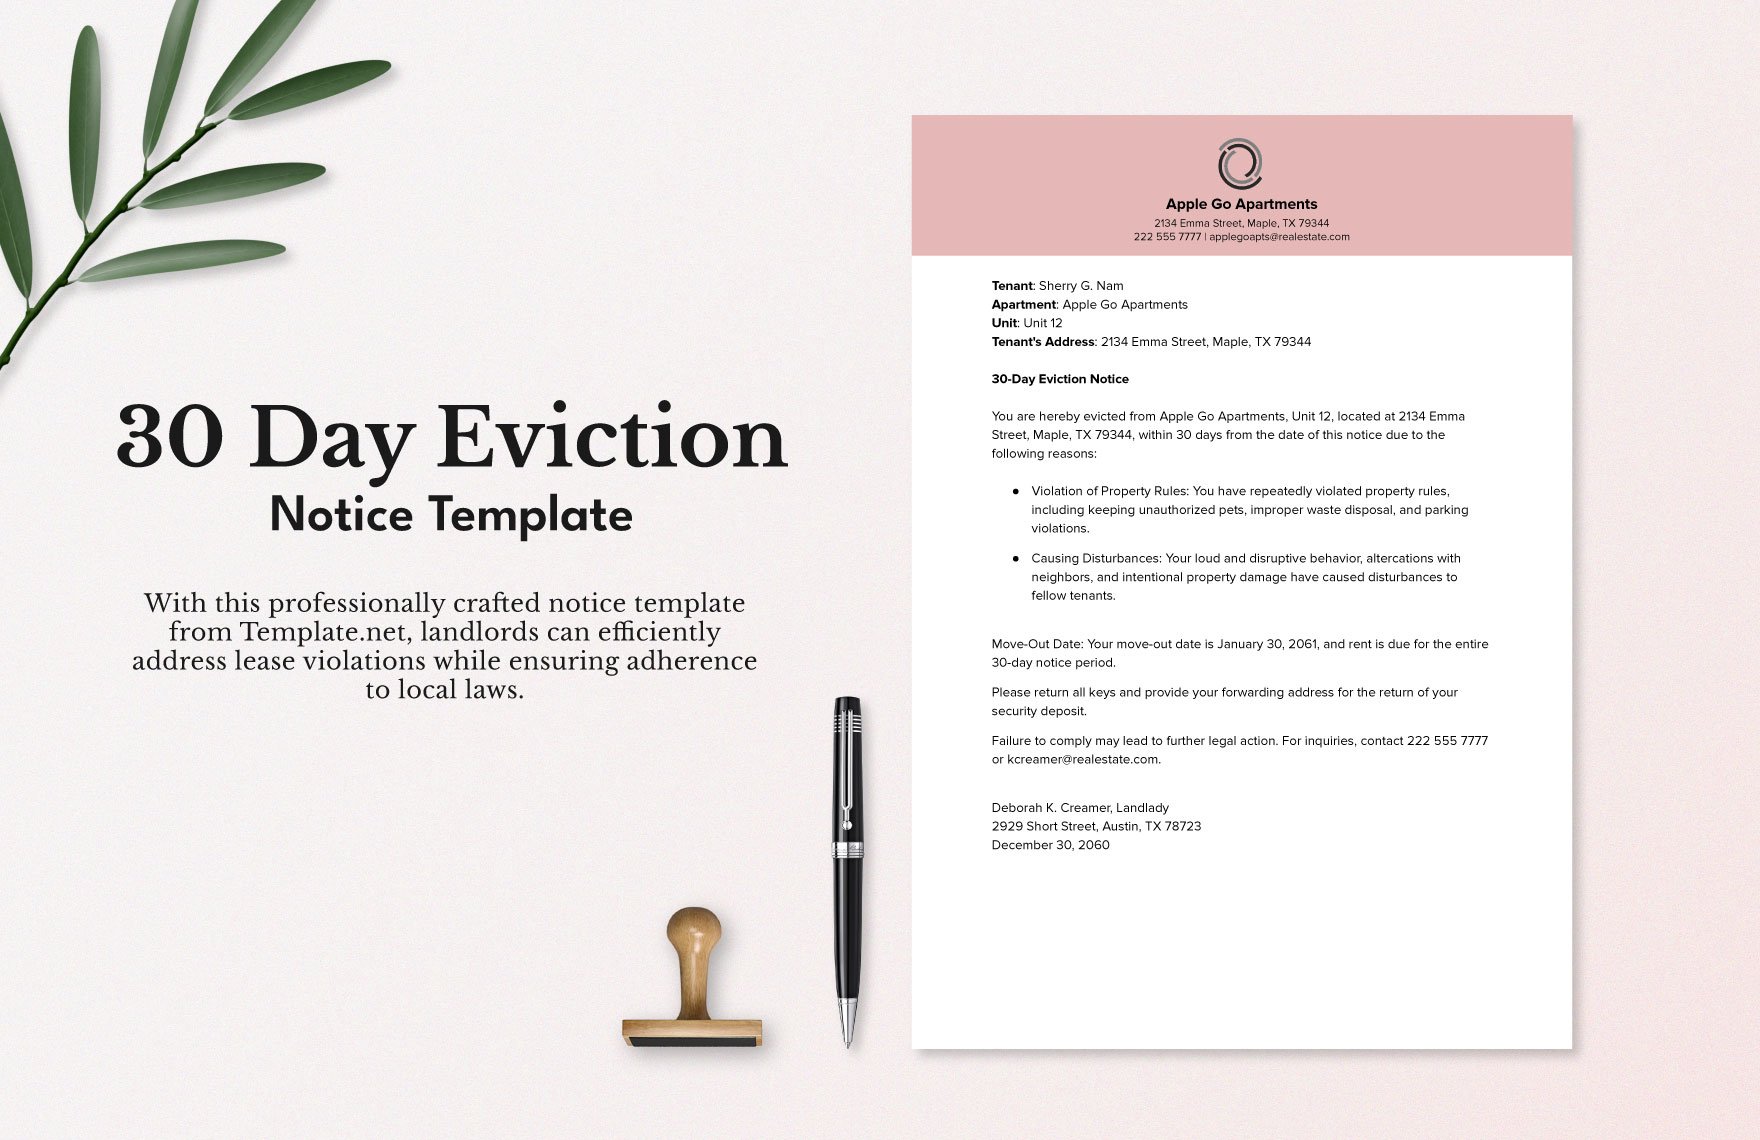 30 Day Eviction Notice Template in Word, Google Docs, PDF, Apple Pages